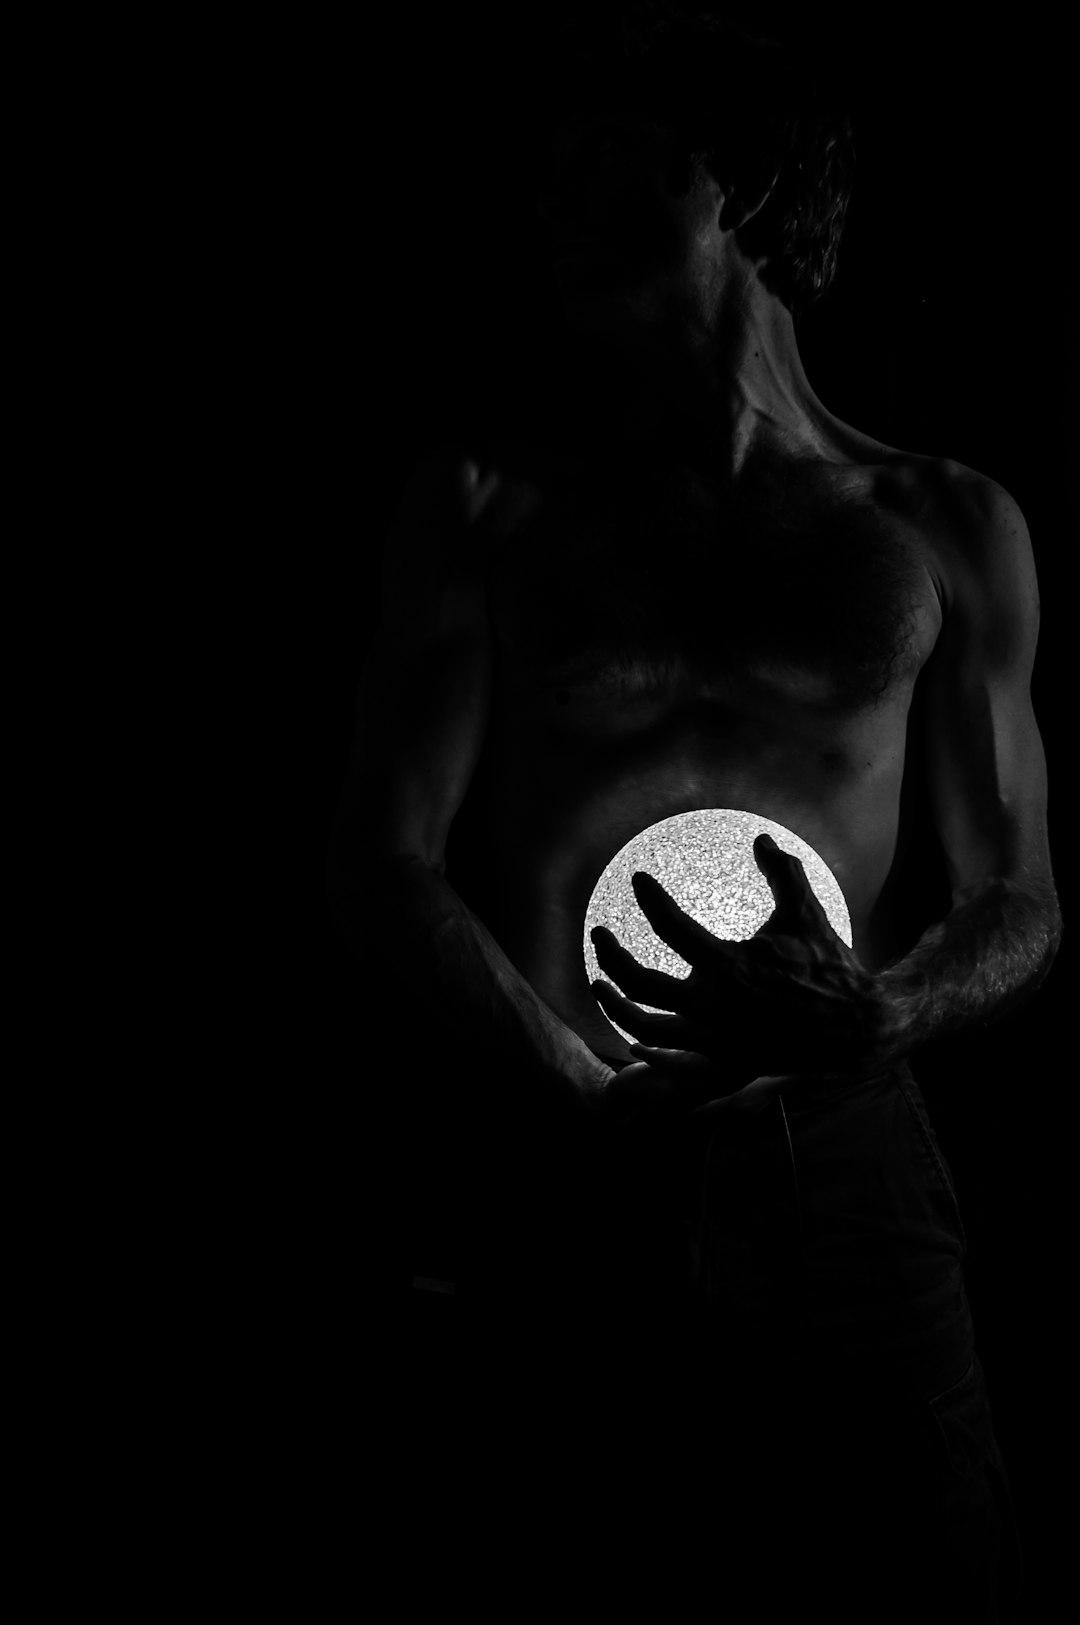 Personal Project. 
Man with Moon.
Recovering from a knee operation, on painkillers, left alone for too long!